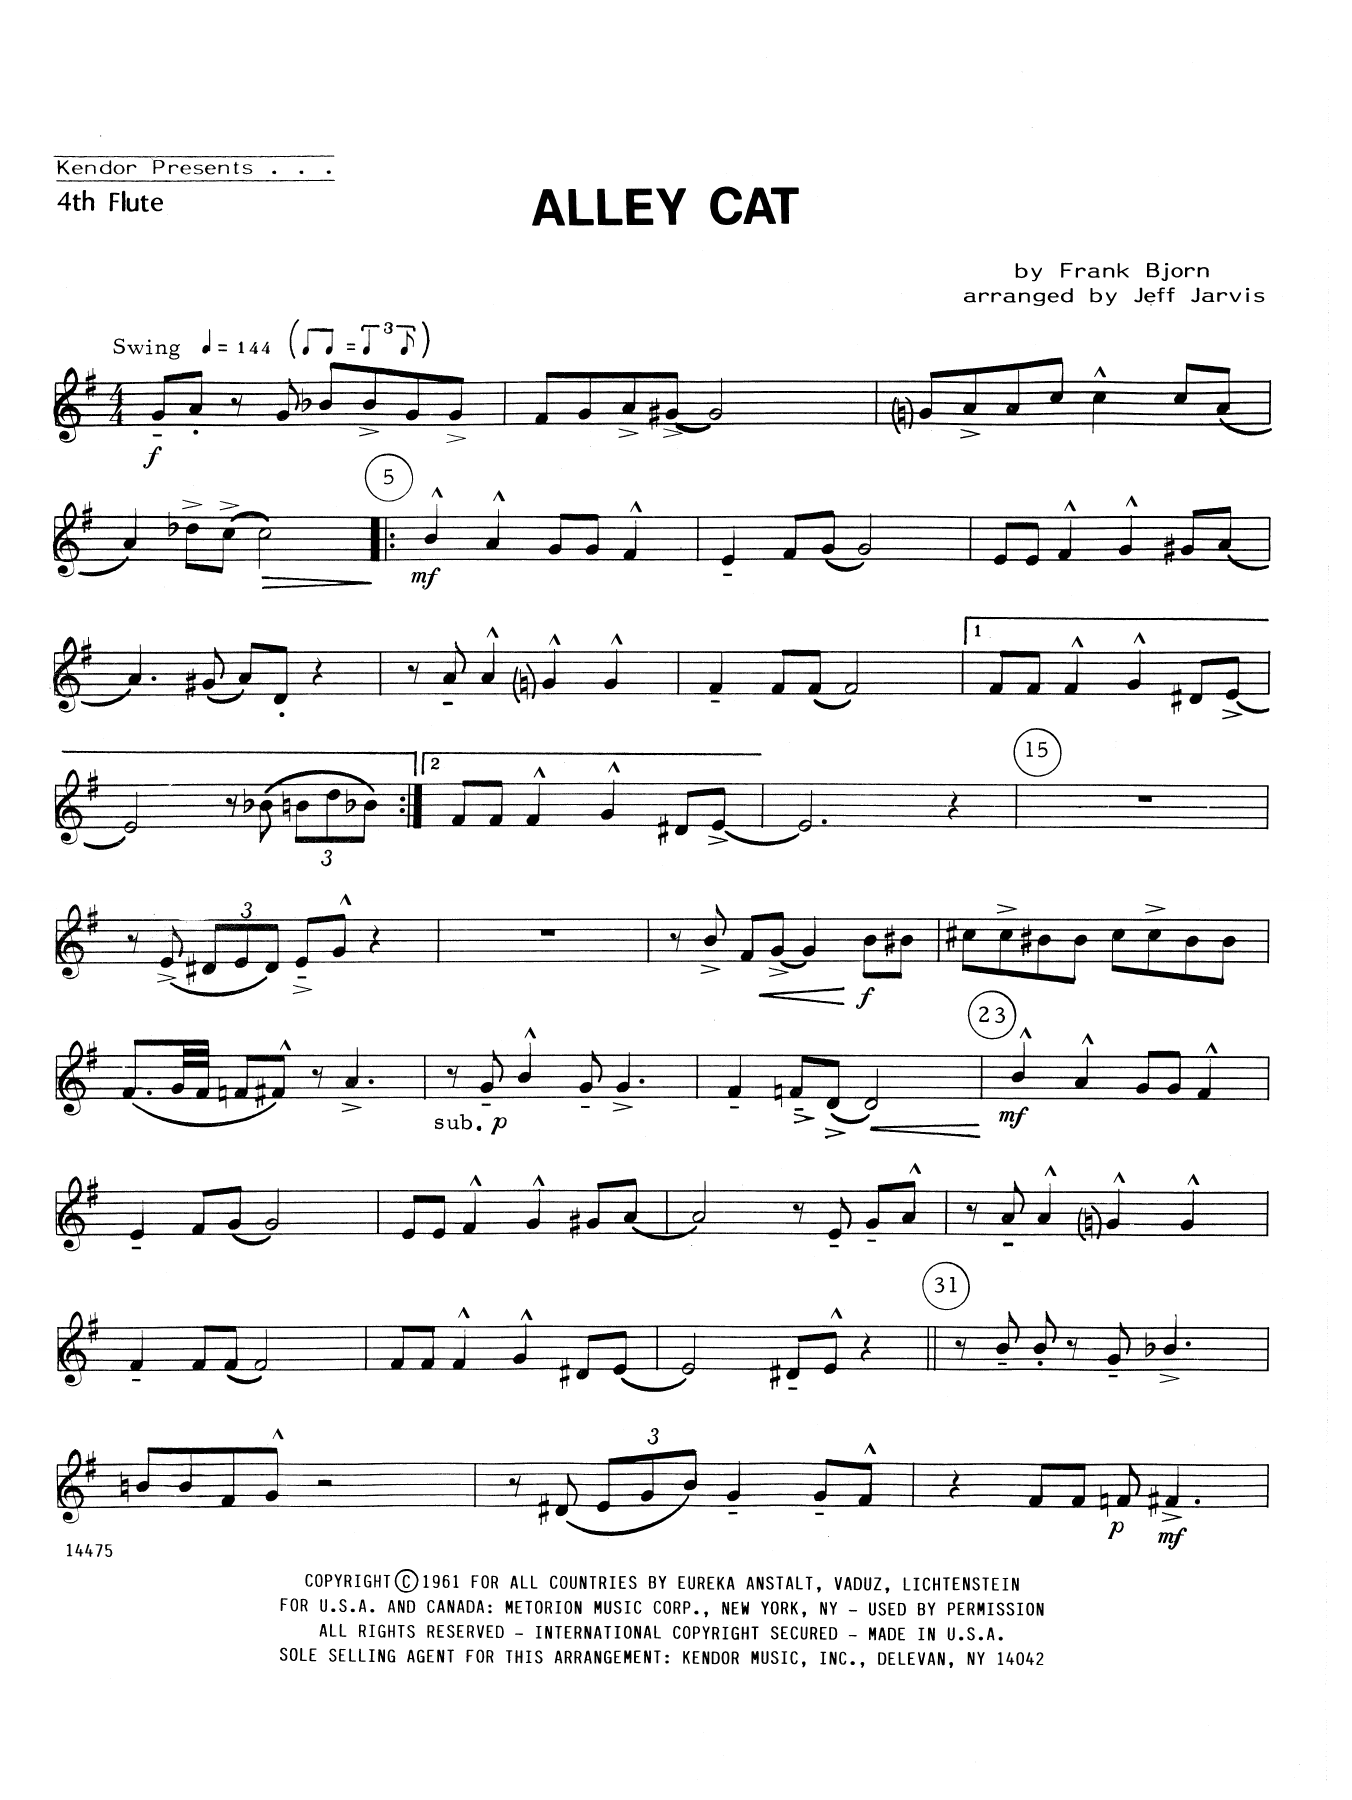 Download Jeff Jarvis Alley Cat - 4th Flute Sheet Music